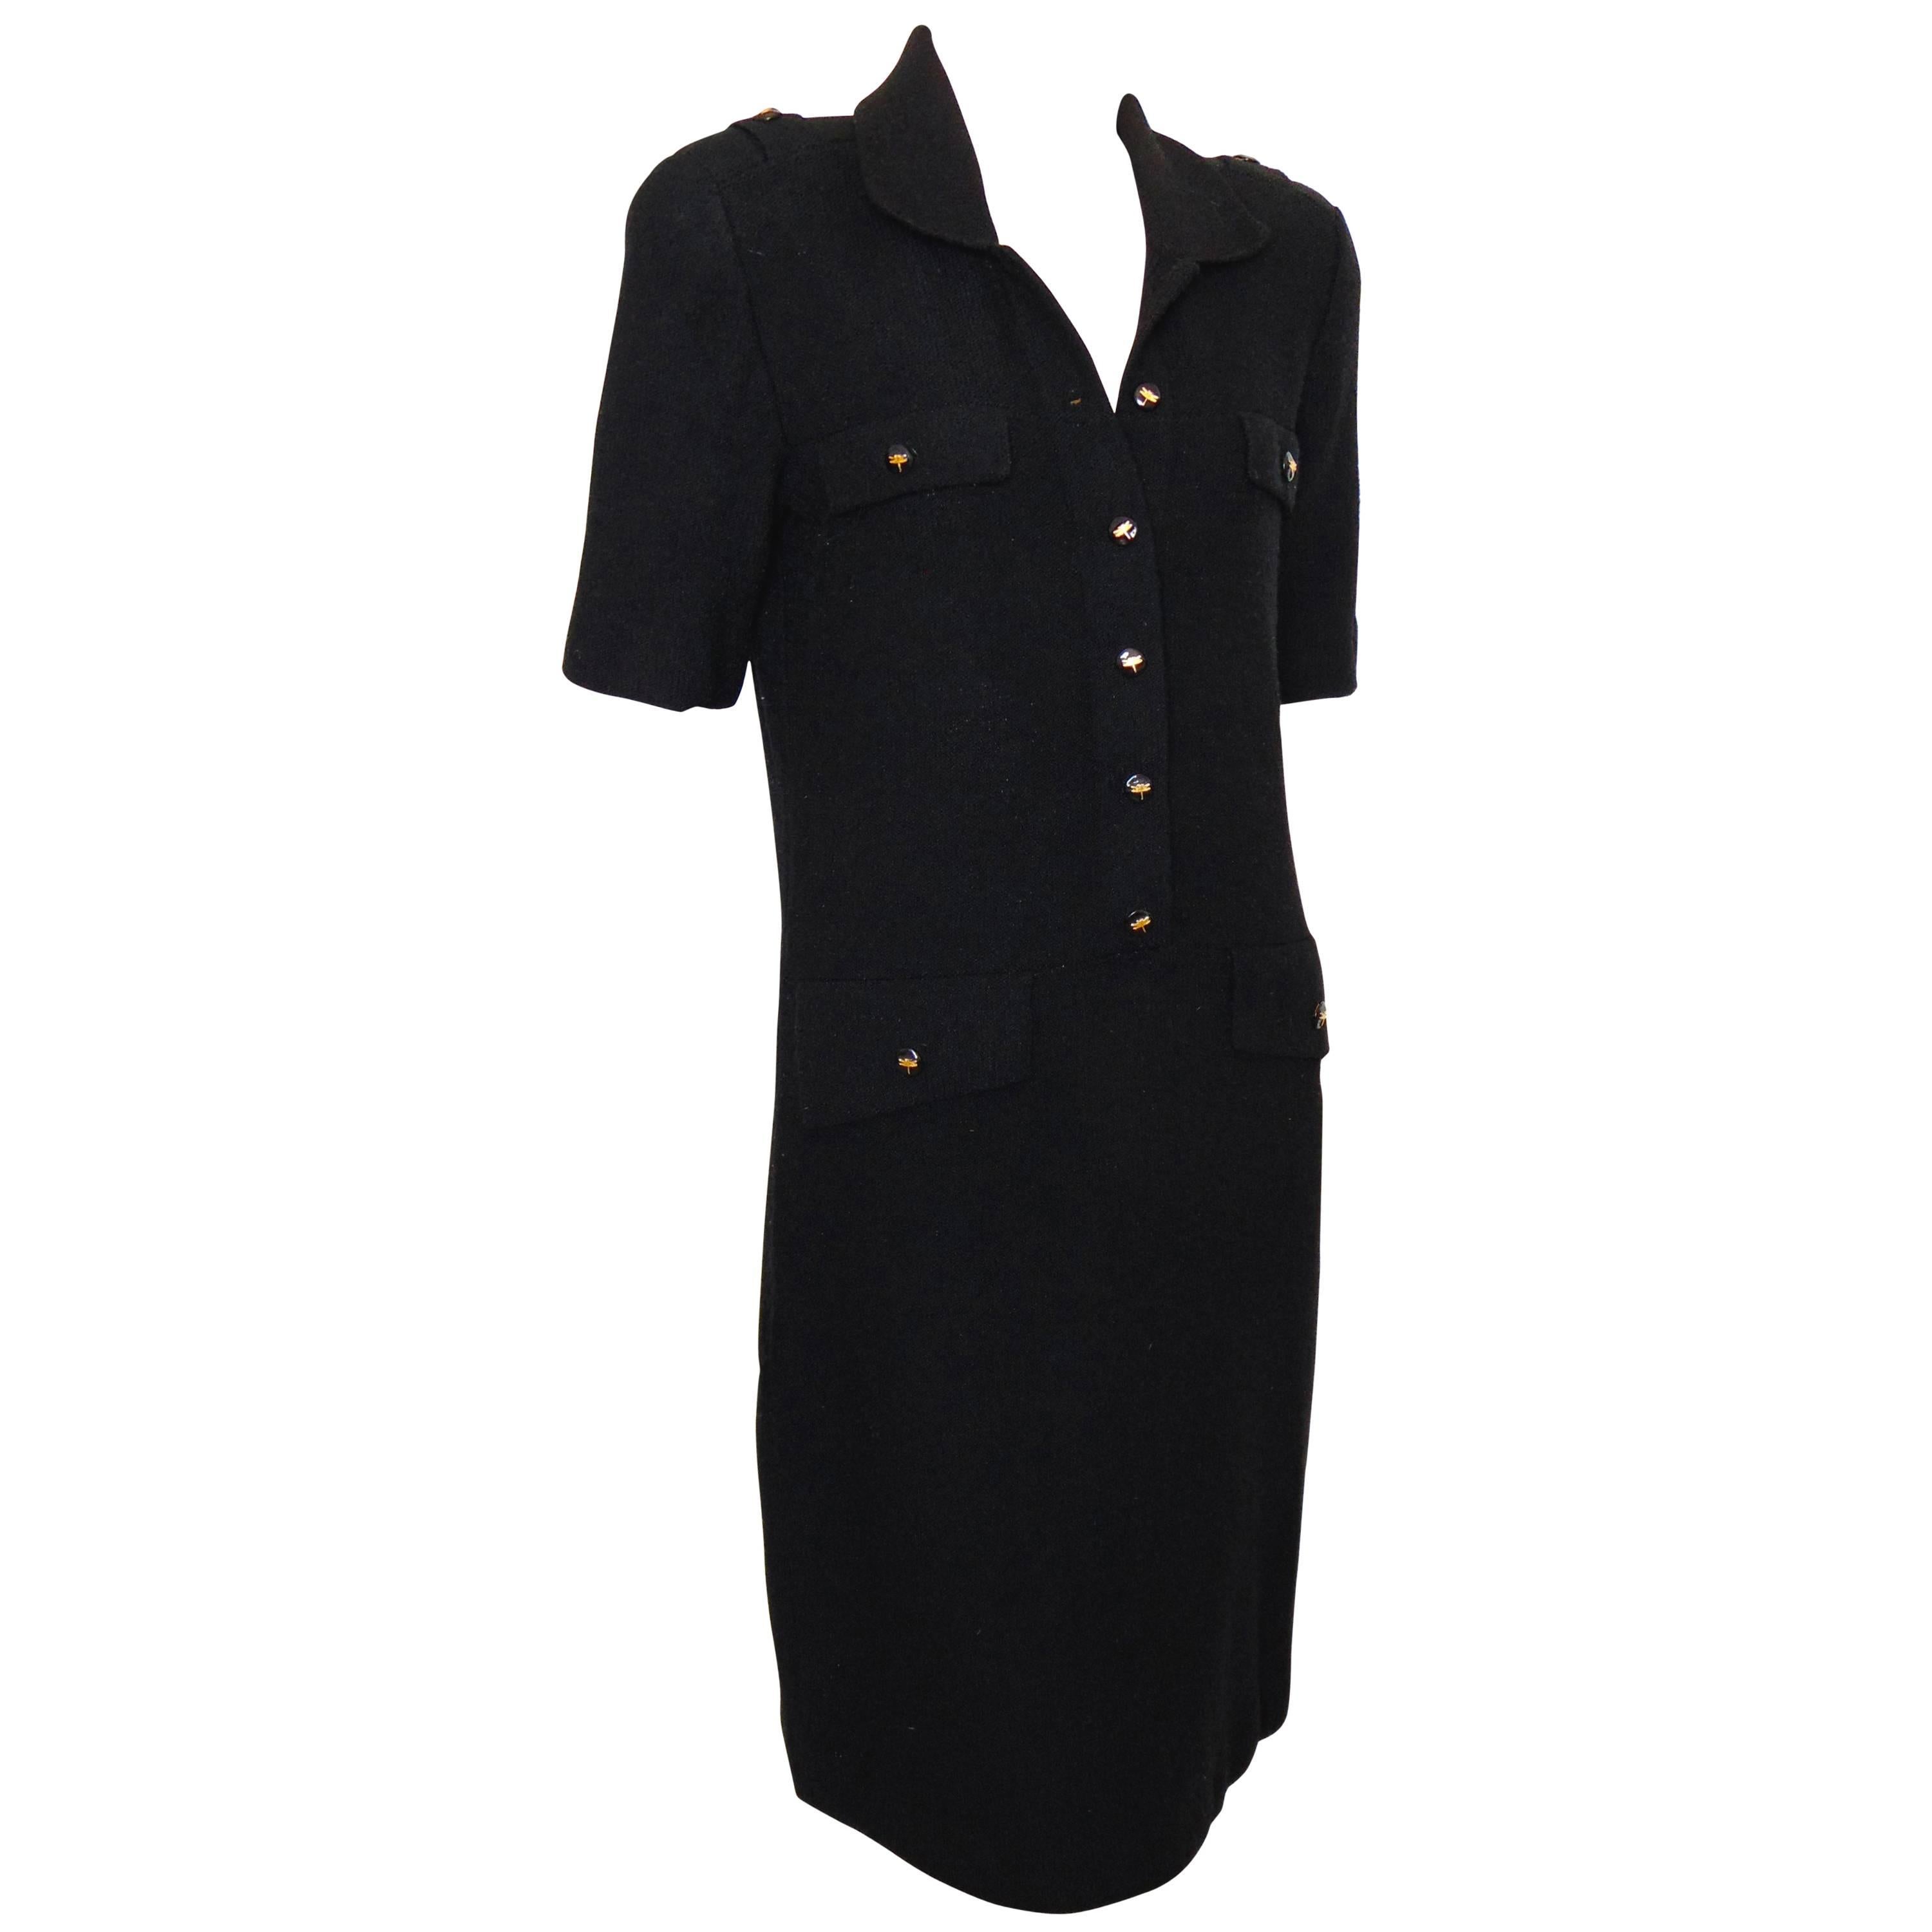 Steve Fabrikant for Neiman Marcus Black Knit Dress with Dragonfly Buttons M 90s